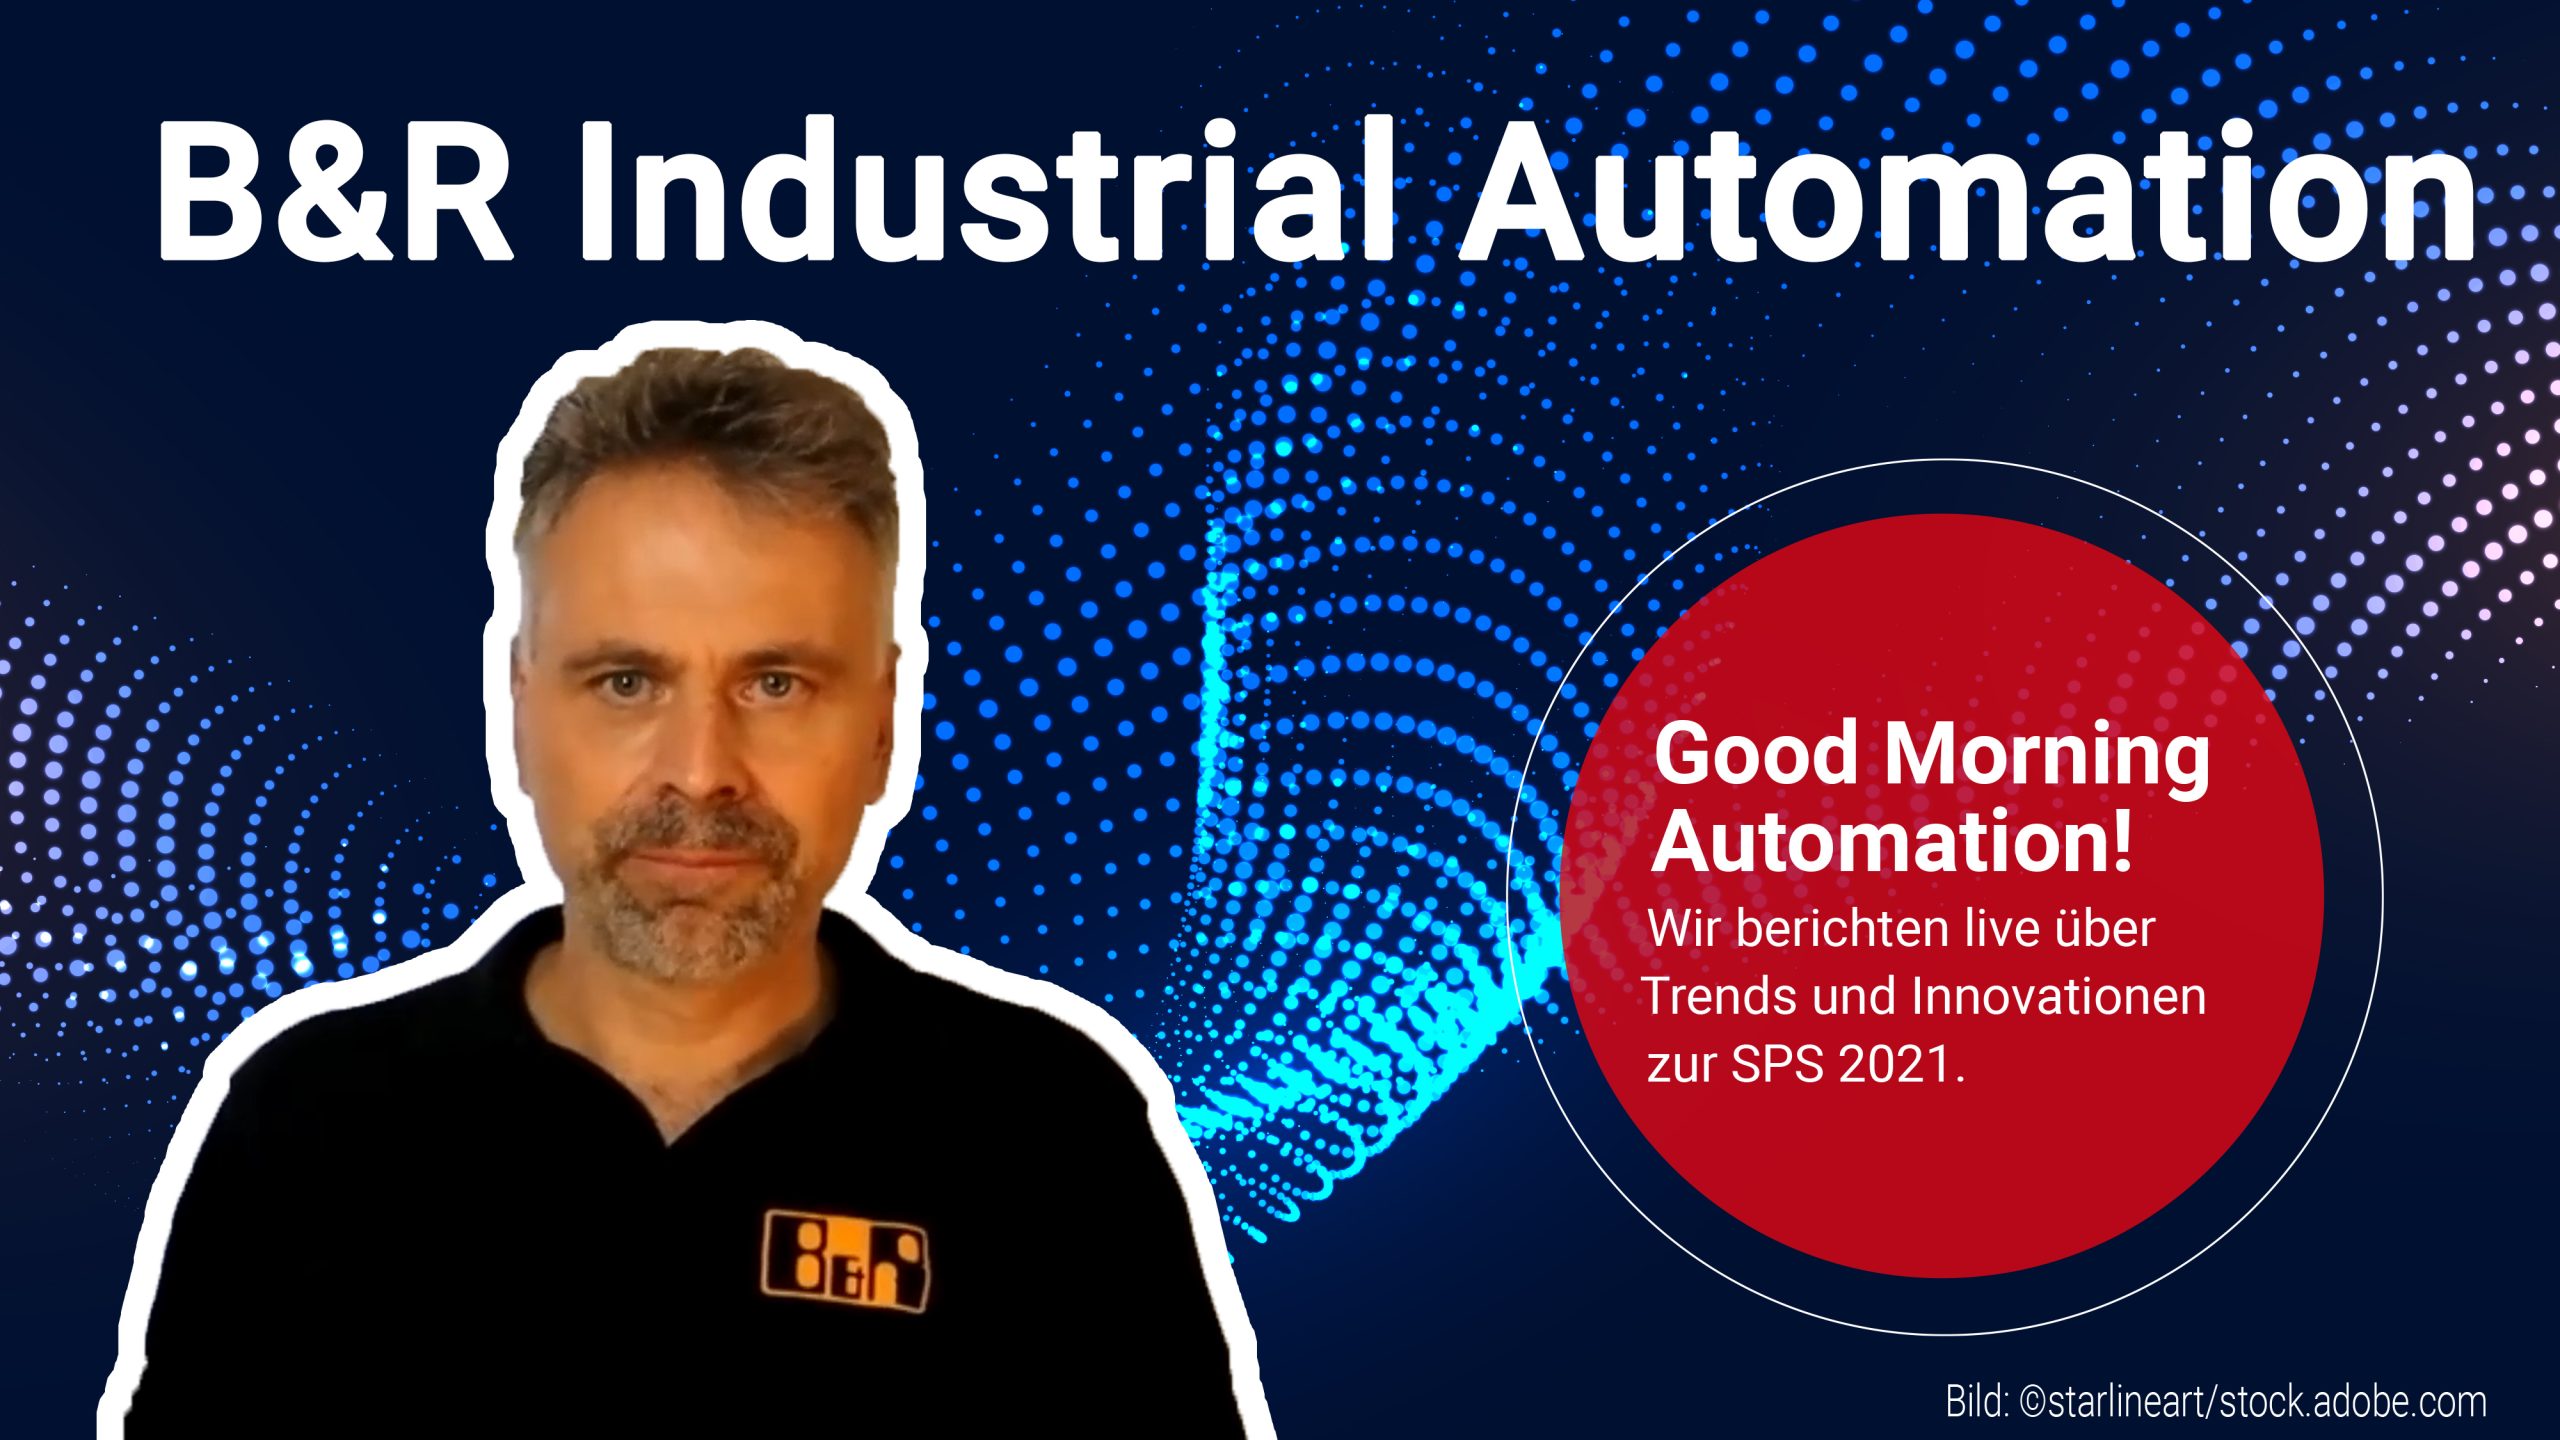 B&R Industrial Automation bei Good Morning Automation Tag 2